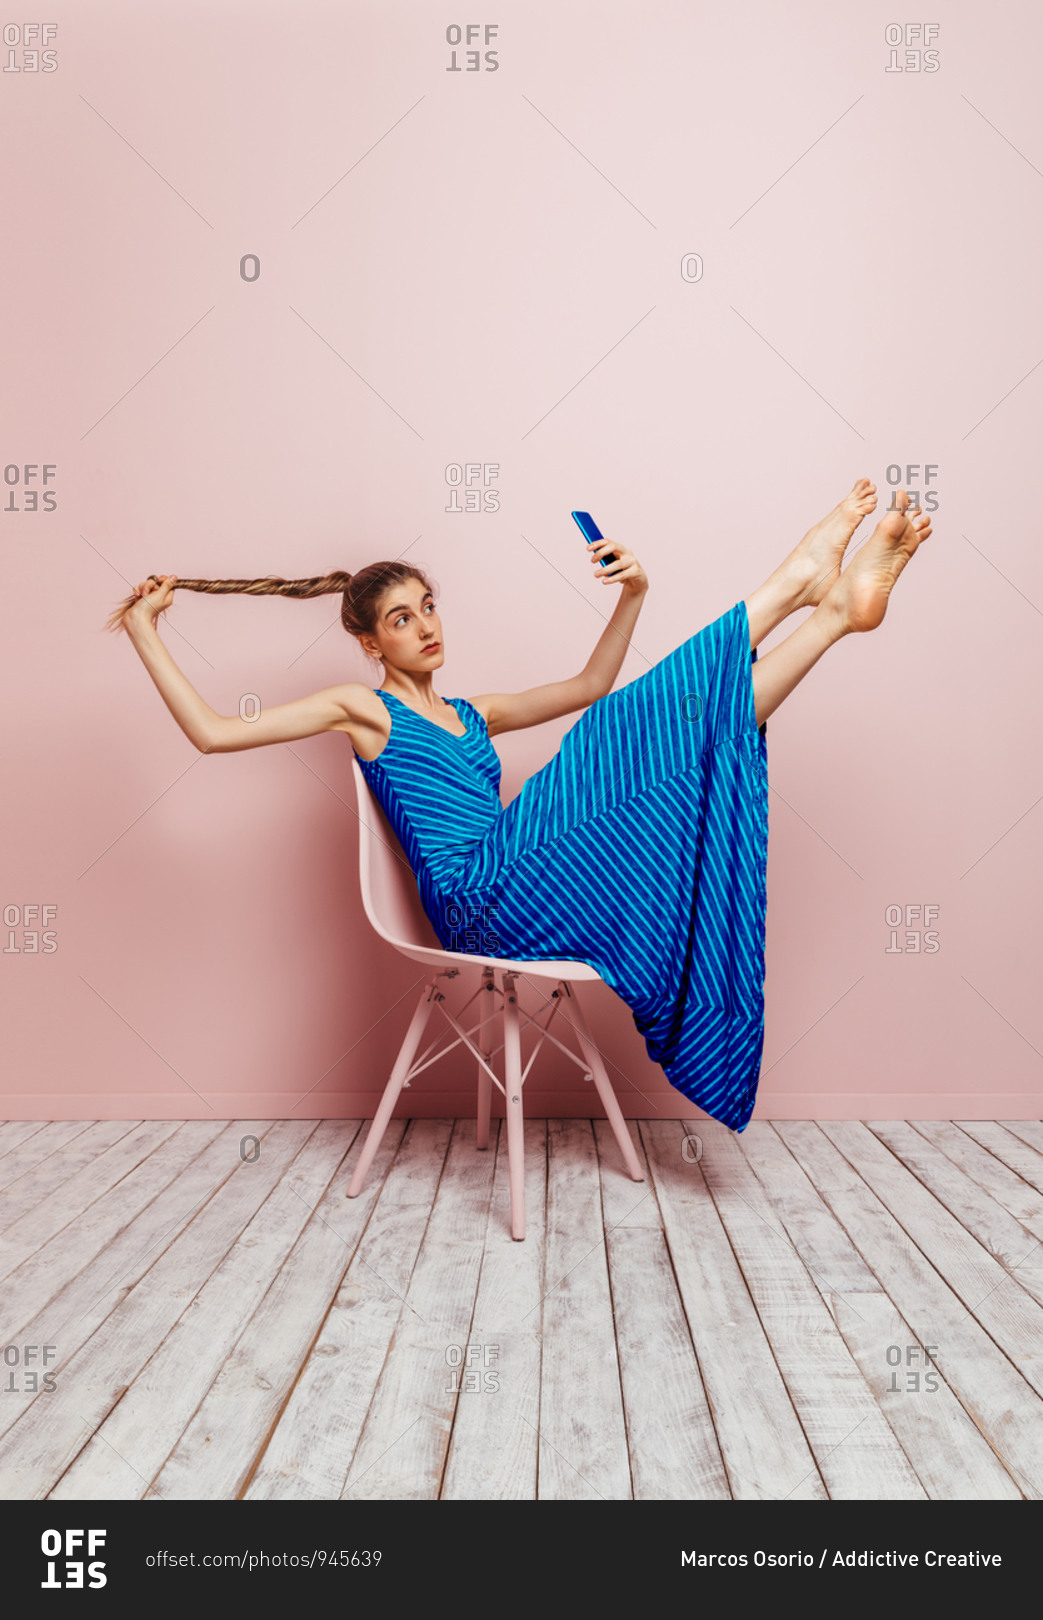 Side view of woman sitting in a chair lifting legs up barefoot looking at mobile phone while taking a selfie holding ponytail up on pink background